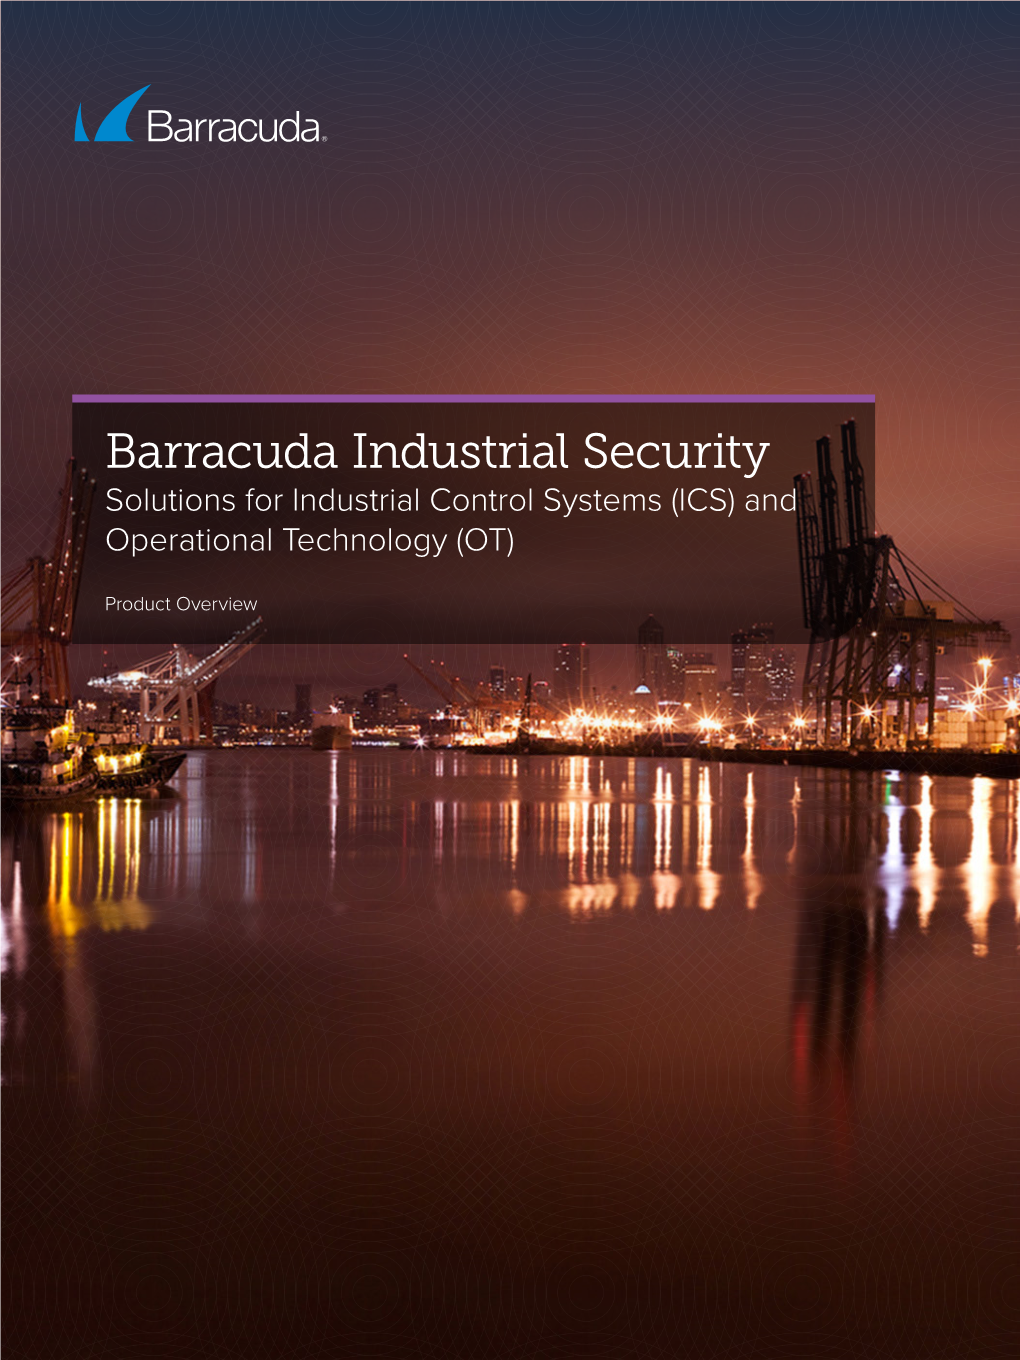 Barracuda Industrial Security Solutions for Industrial Control Systems (ICS) and Operational Technology (OT)